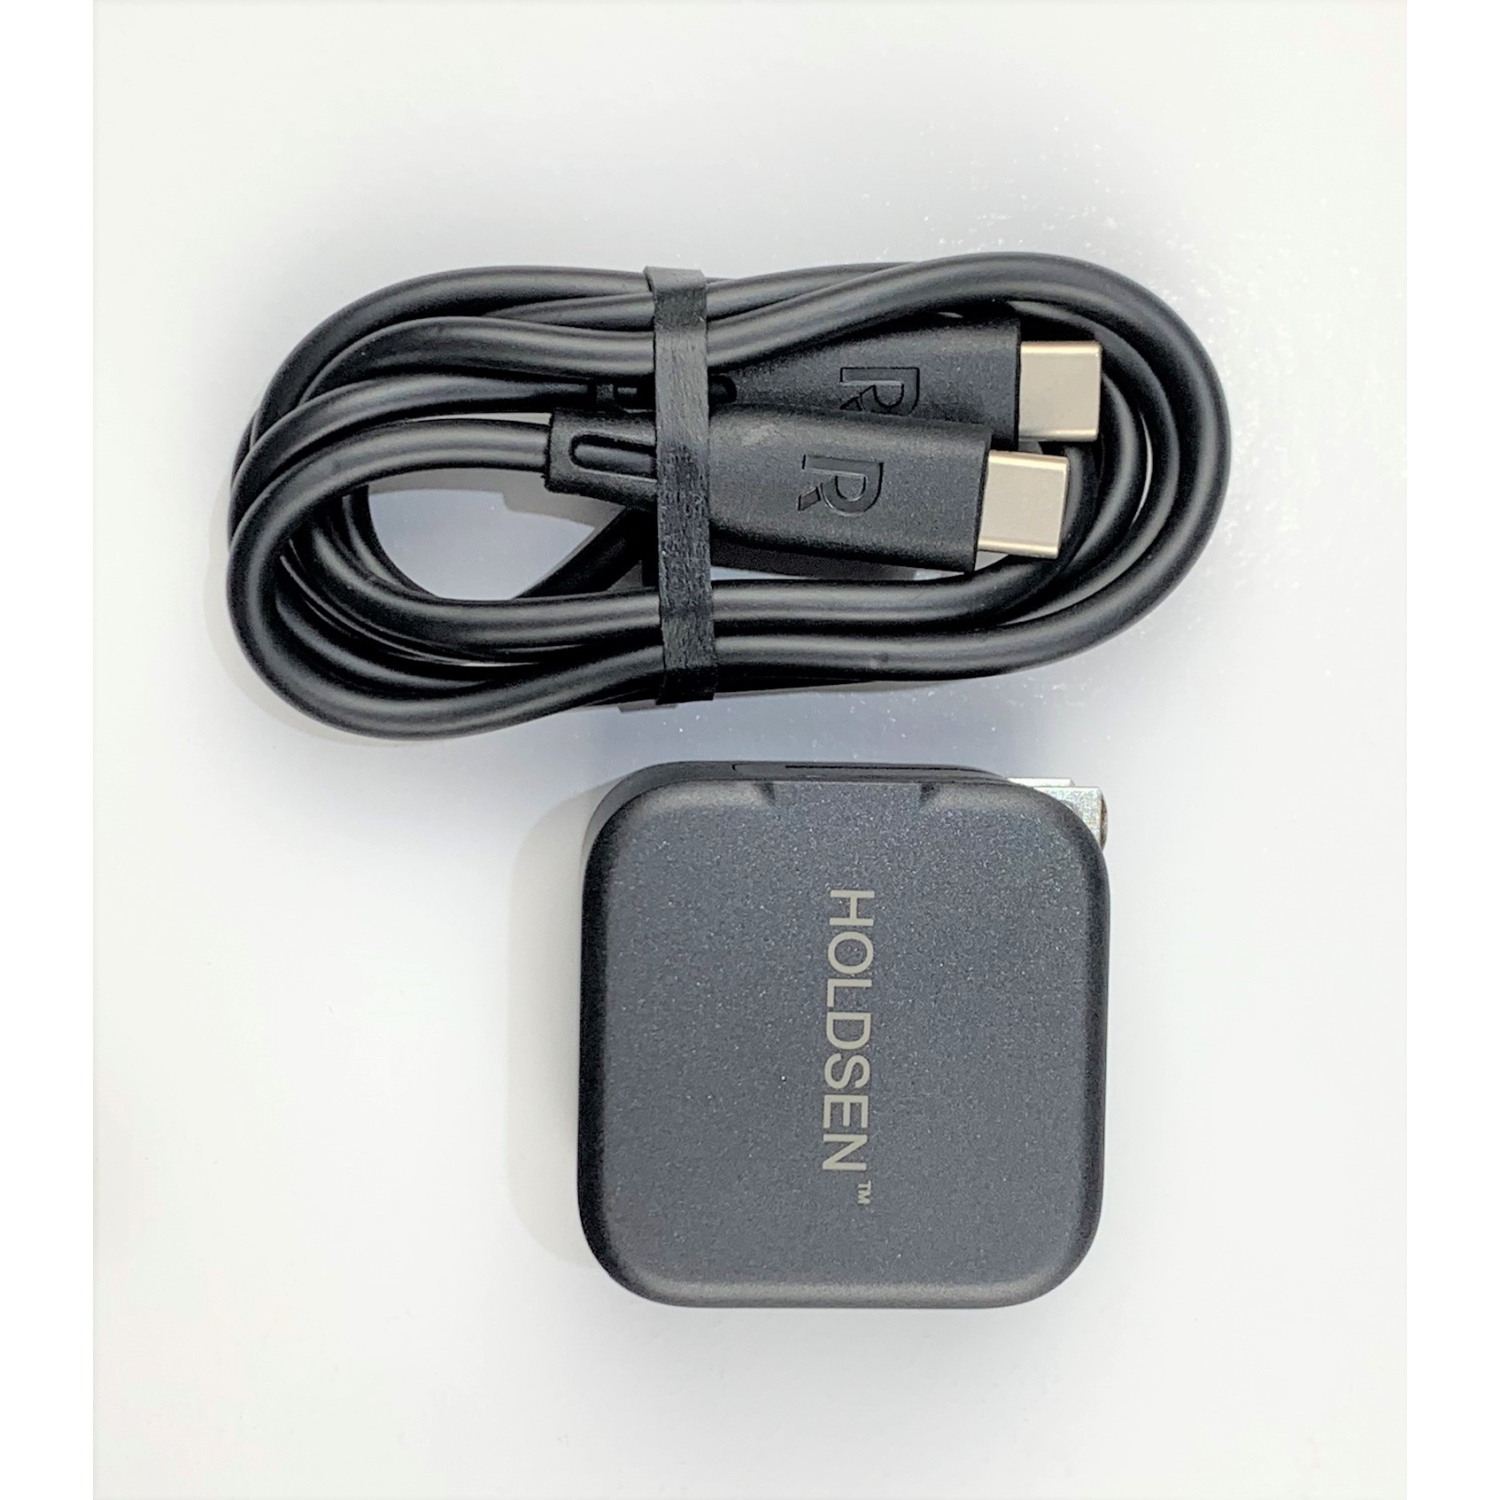 20W Type C USB PD charger Quick Charge Power Delivery charger for Huawei Nova and other type C models